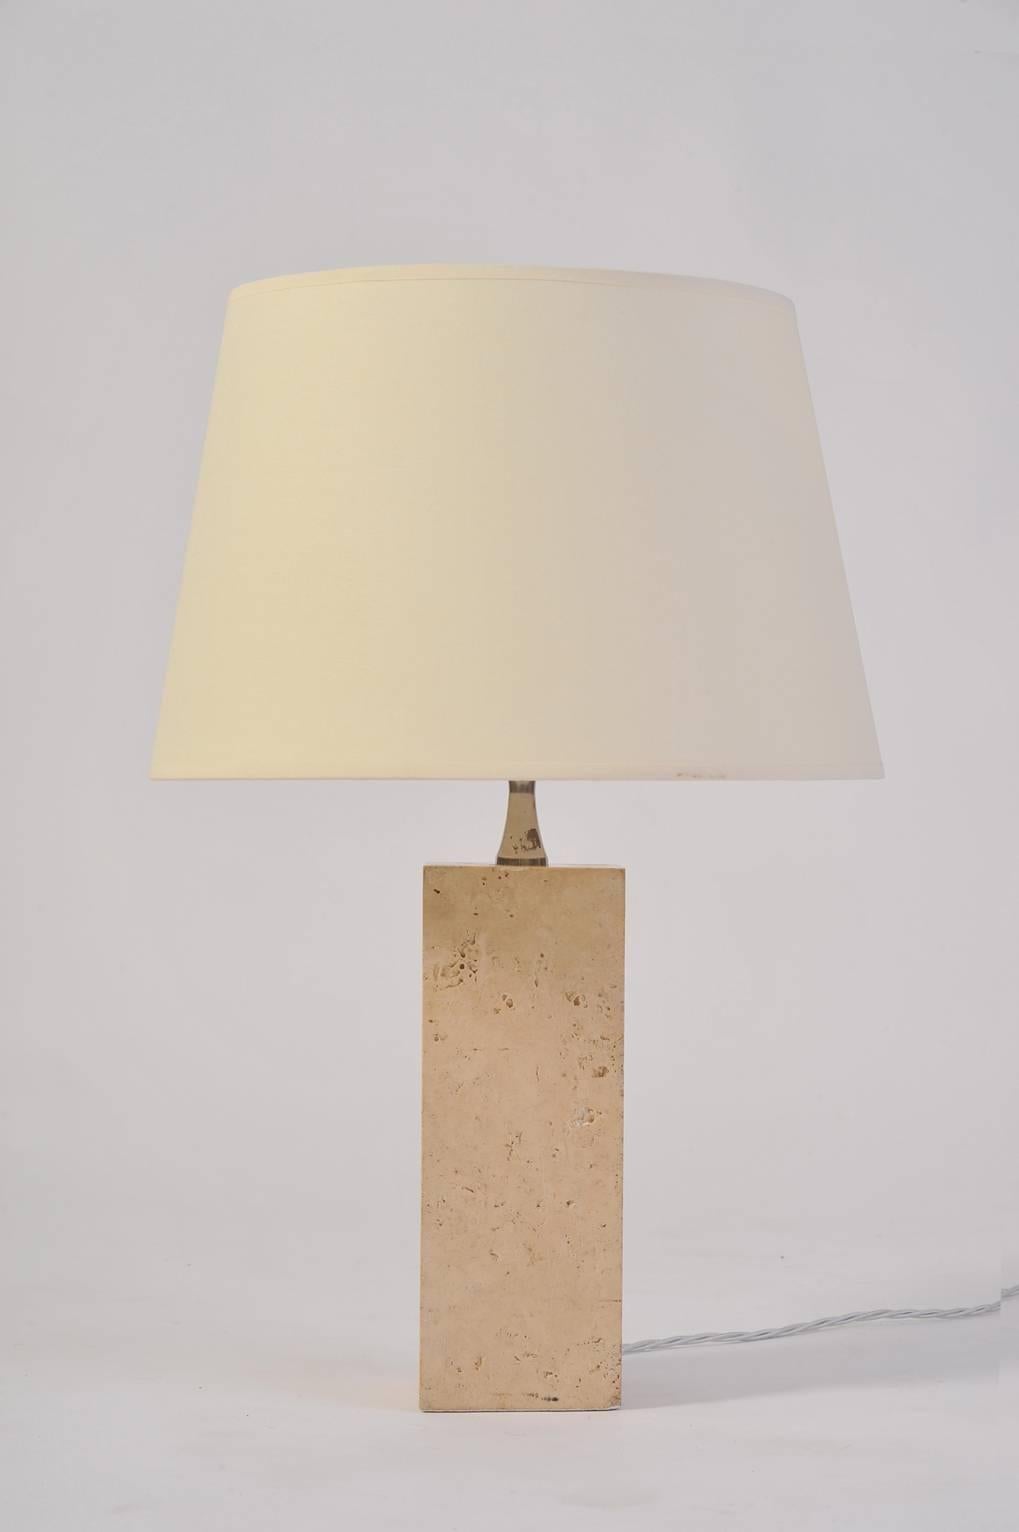 A travertine square column table lamp, by Maison Barbier
France, circa 1970.